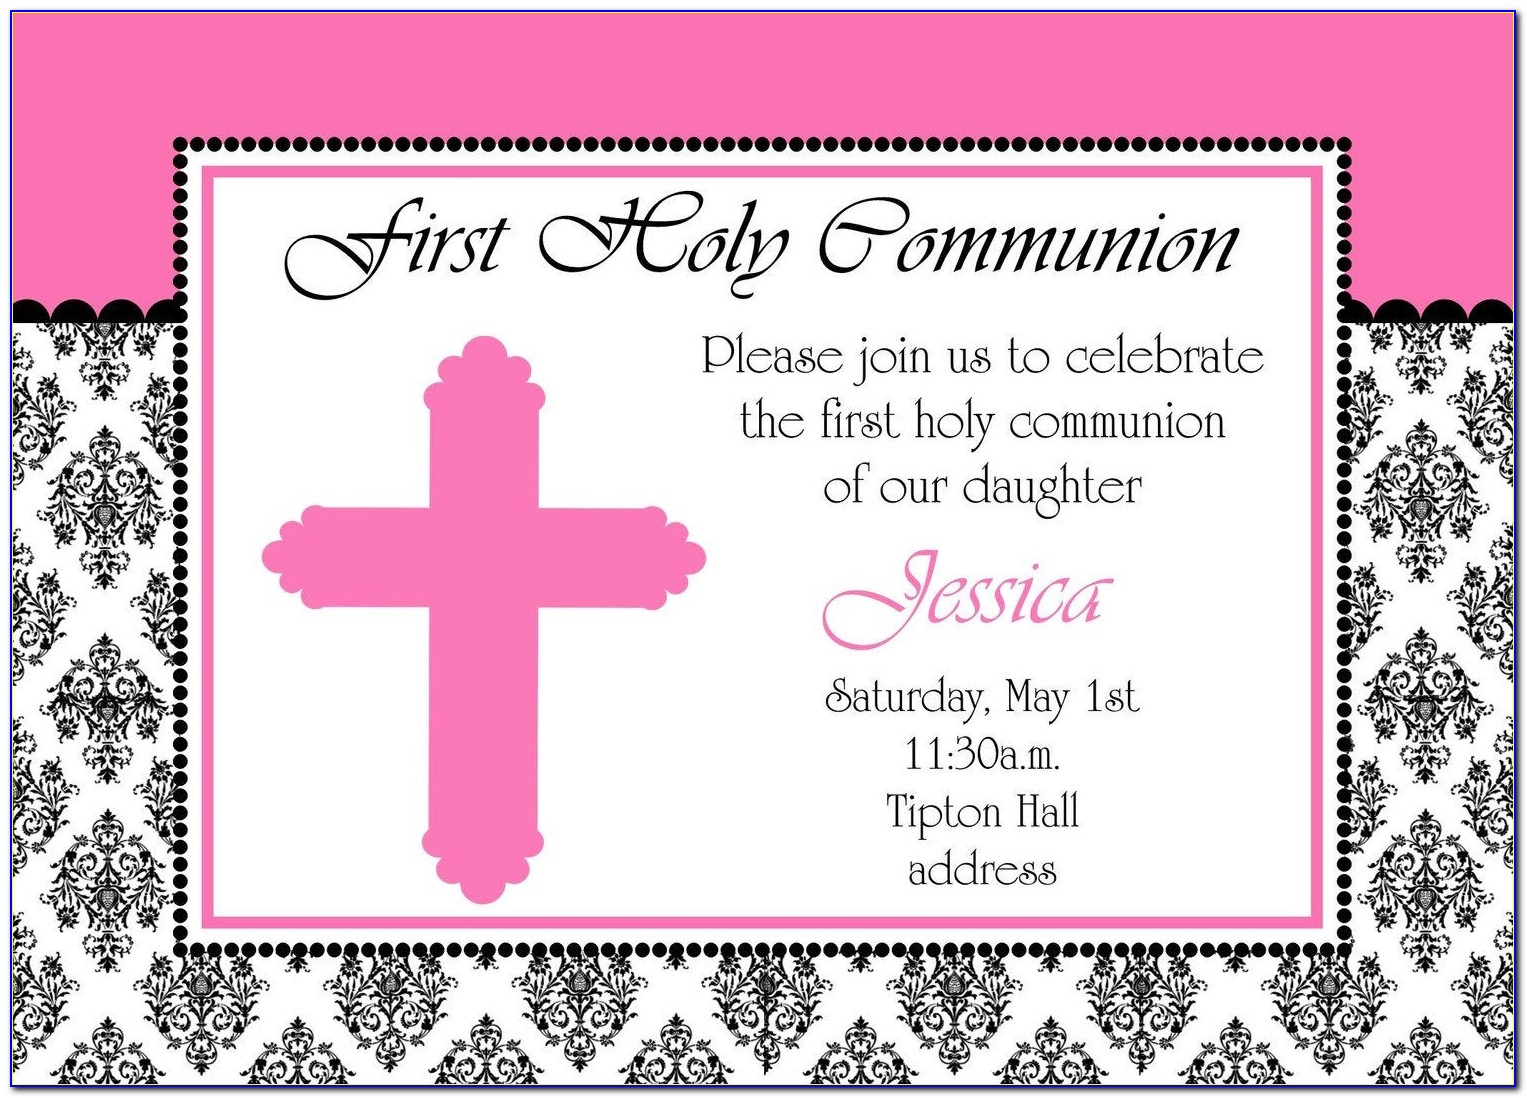 First Holy Communion Invitation Message